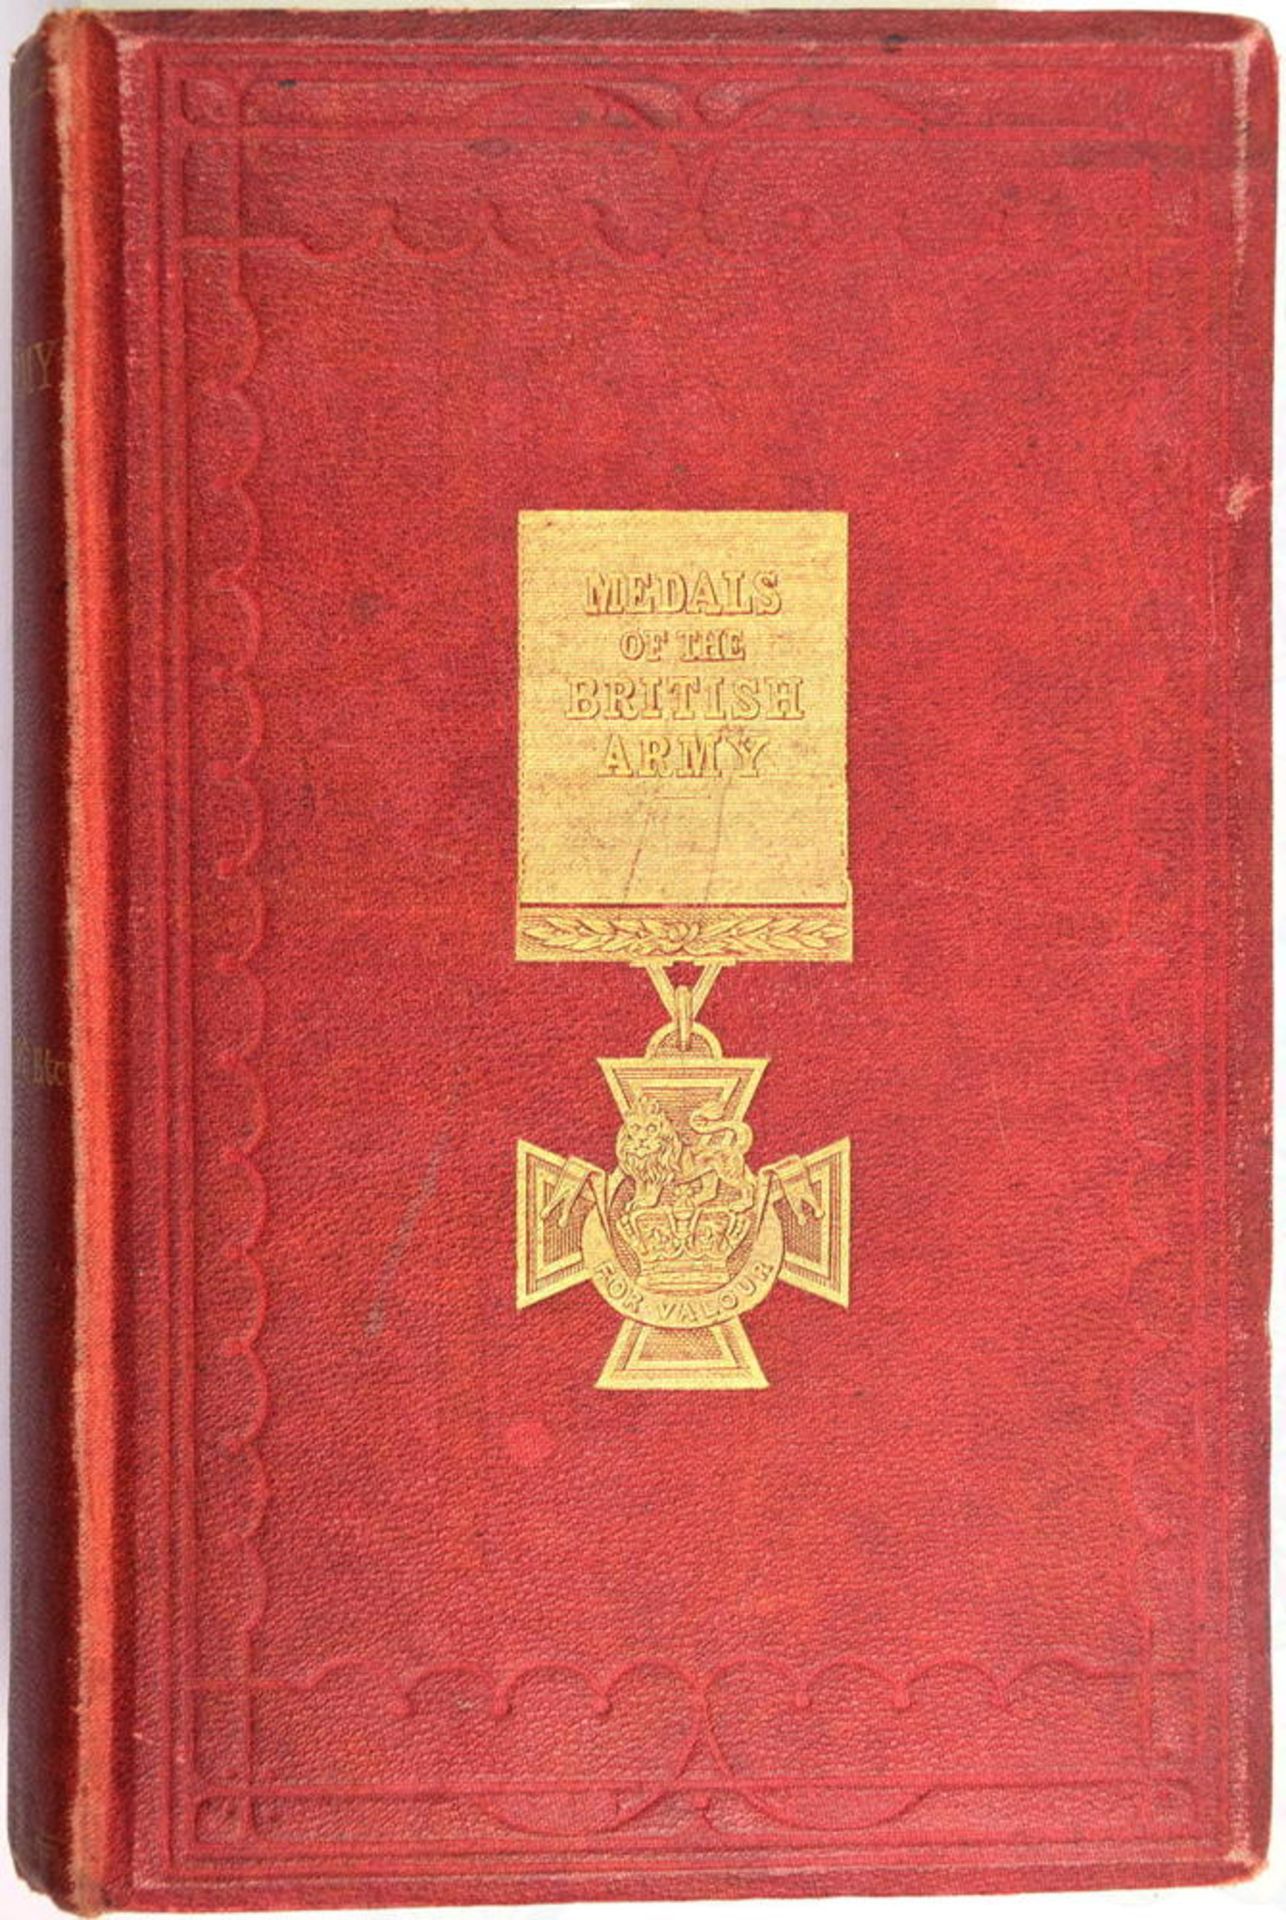 MEDALS OF THE BRITISH ARMY, and how they were won, Thomas Carter, London 1861, 3 Teile in einem